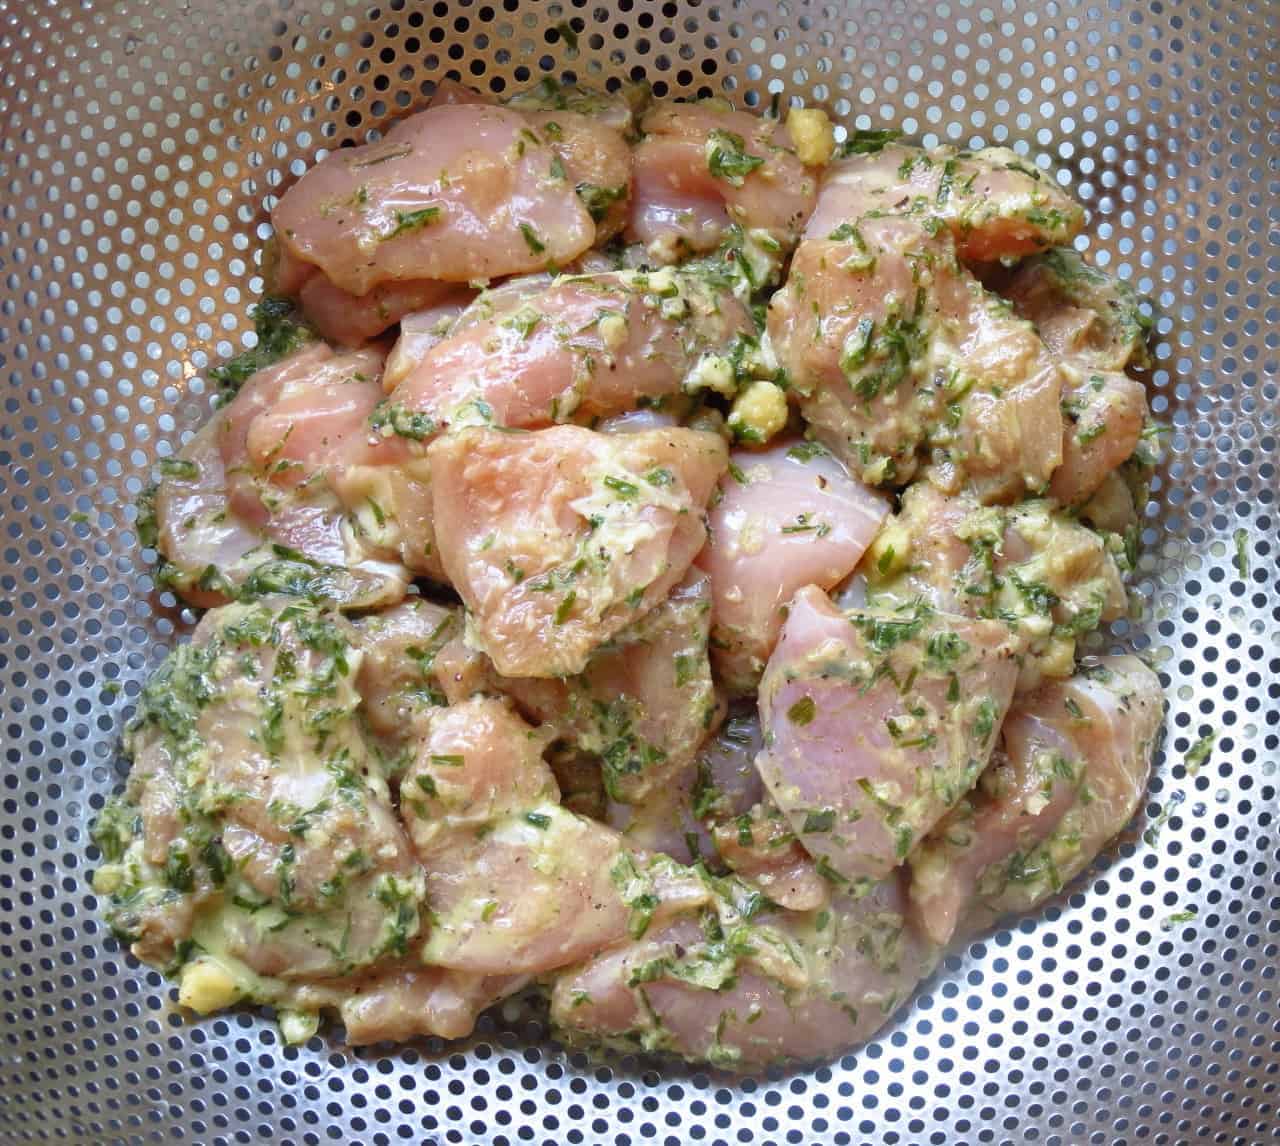 Marinated chicken thigh pieces in a stainless strainer.